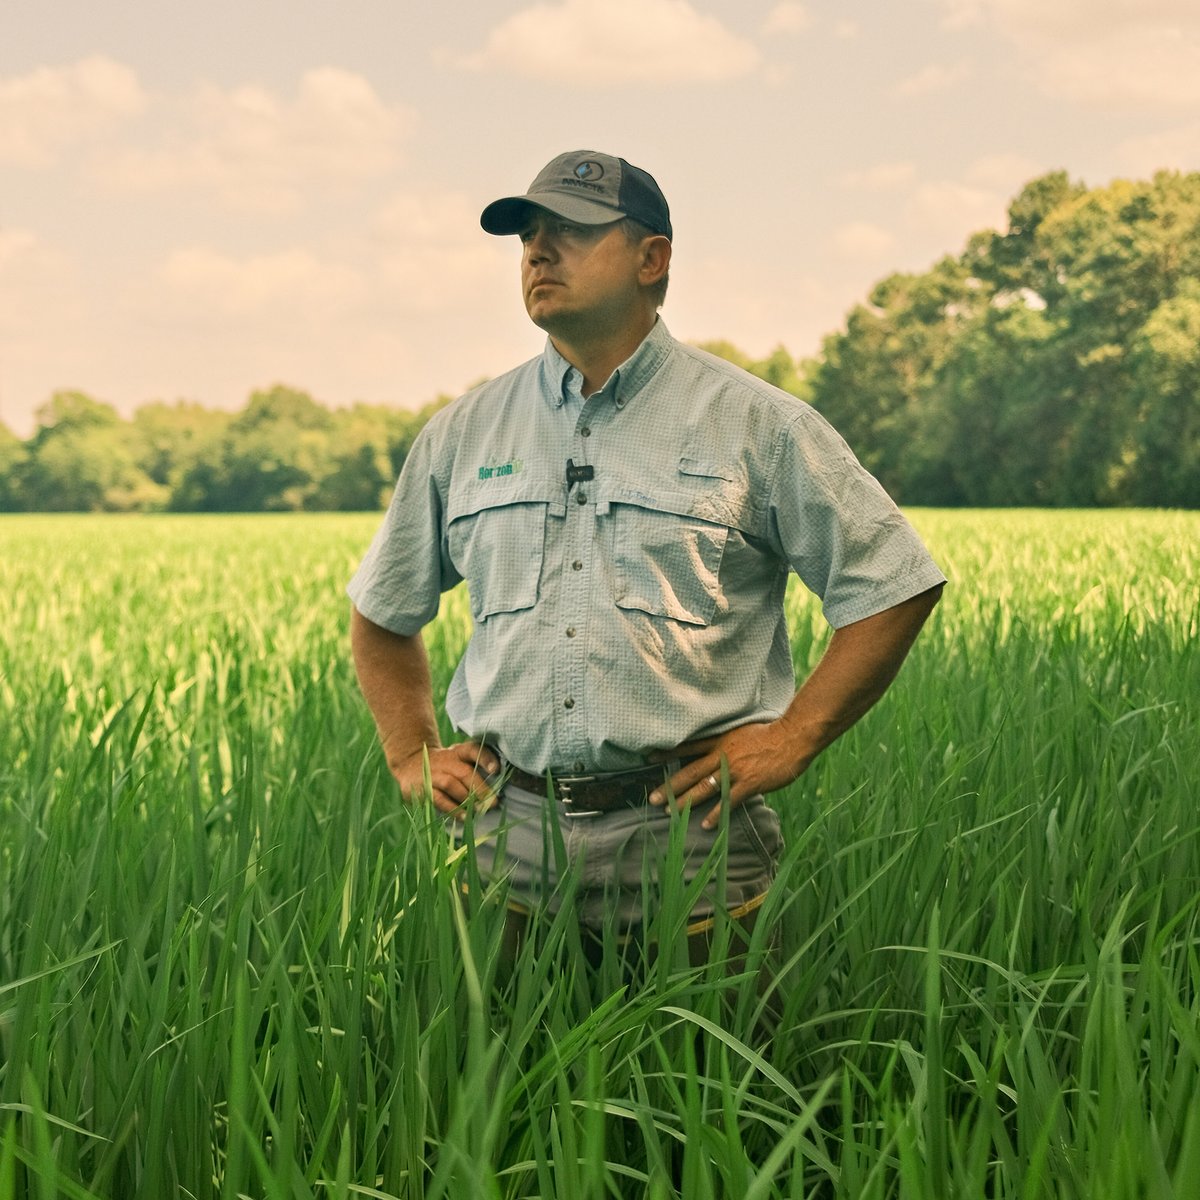 “Having to watch your blood sugar is the #1 reason people shy away from rice, but we’re rice people.”—Michael Frugé in Eunice, La., who farms @LSUAgCenter rice, incl. @parishriceusa that’s better for diabetics. lsu.edu/working-for-lo… #ScholarshipFirst #LSUWorks #WBTTW @PBRCNews